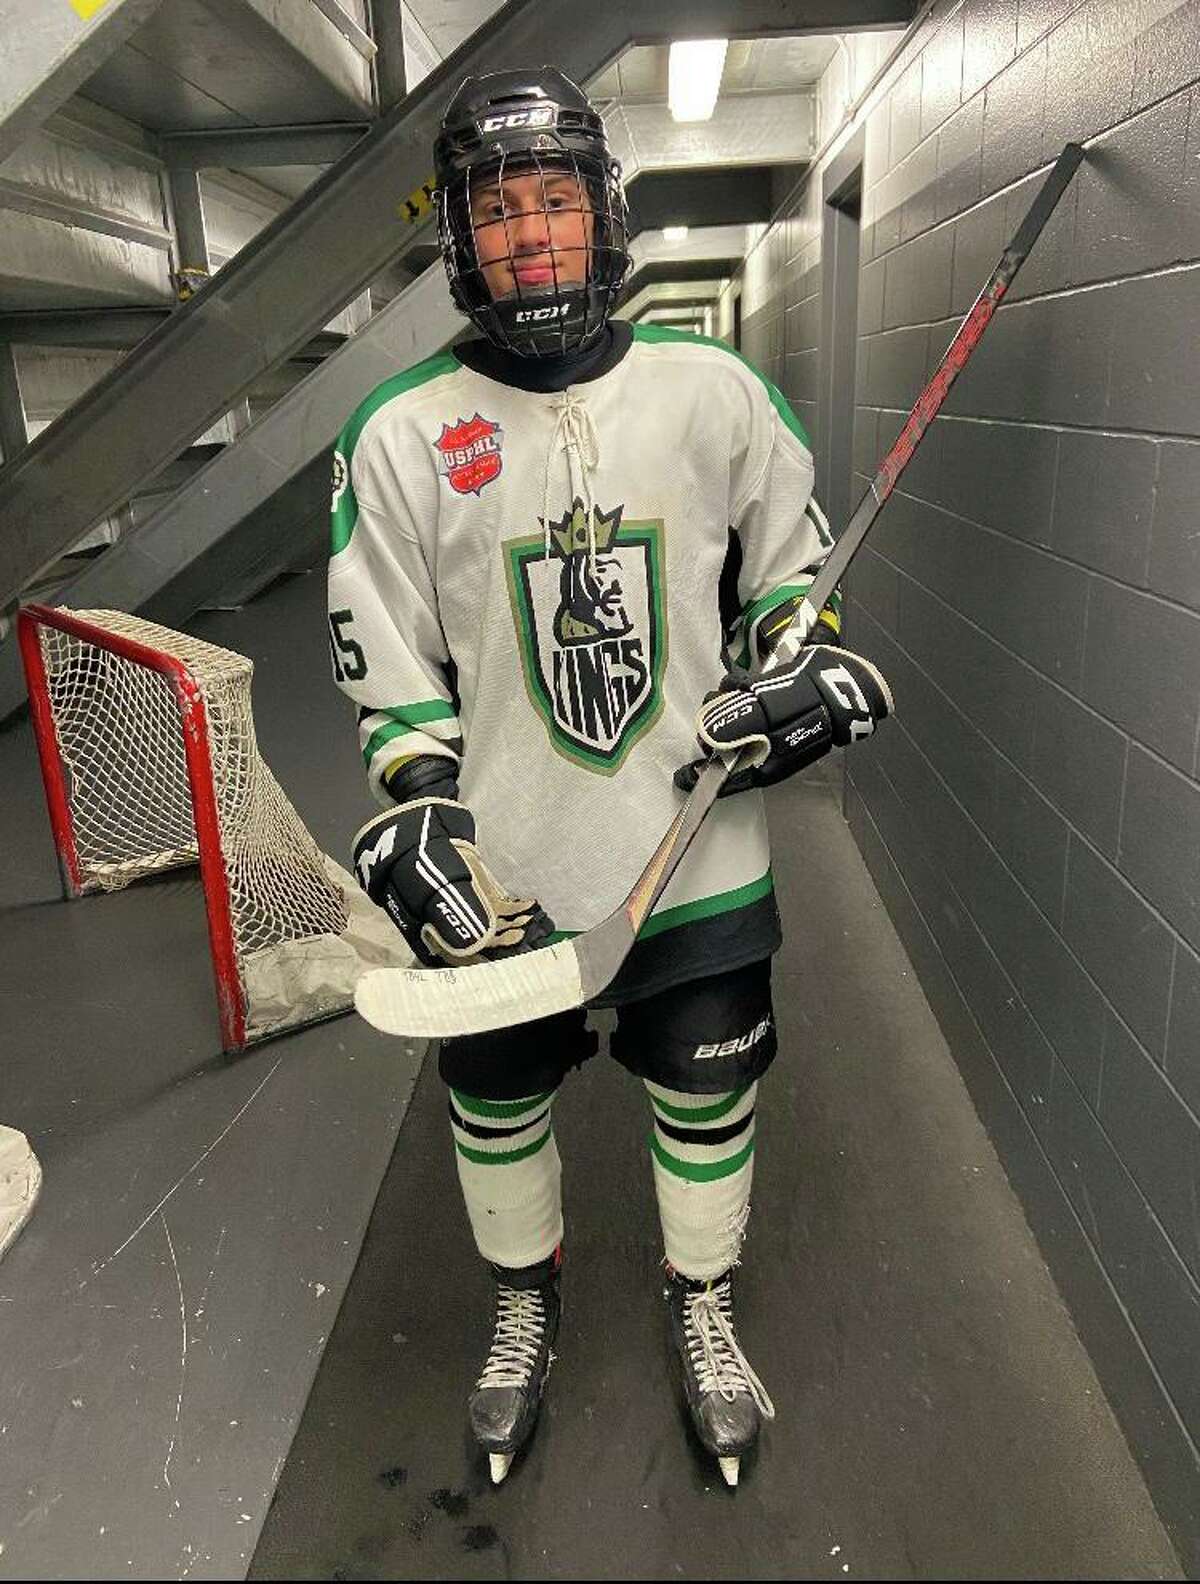 Sam Brande (pictured) has started a petition in the wake of the death of his friend, Teddy Balkind. Balkind died Jan. 6, 2022 in a hockey-related accident. The petition calls for the mandating of protective neck guards in hockey.